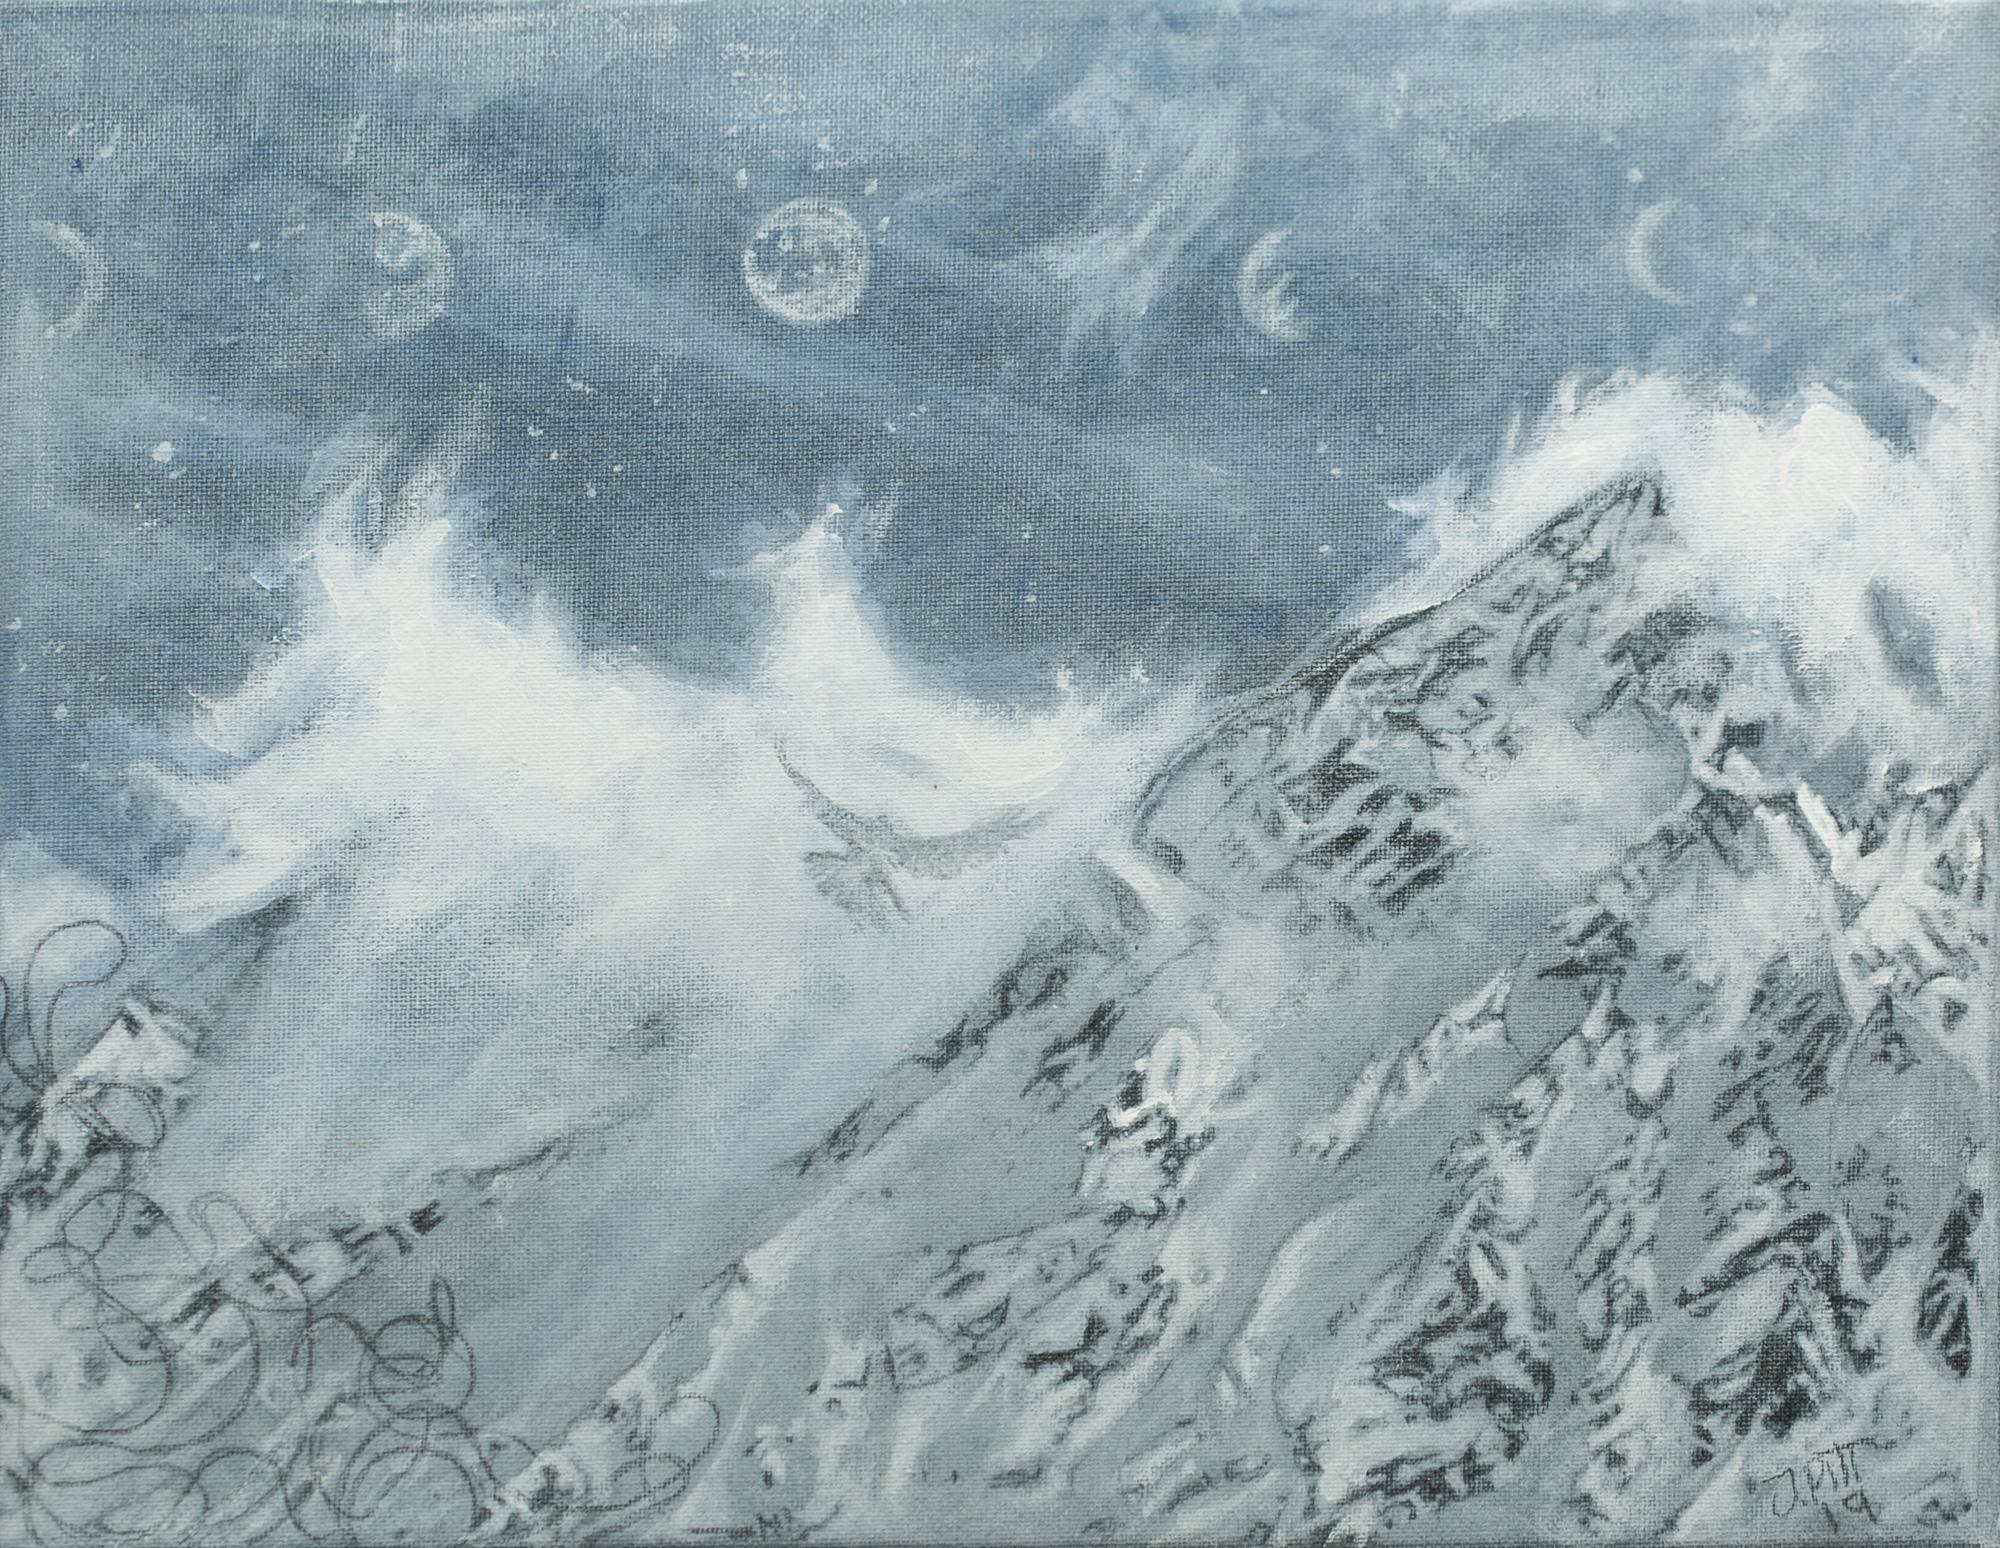 "Time", Snowy, Mountain, Landscape, Blue and Grey Tones, Snowscape - Painting by Jessie Pitt